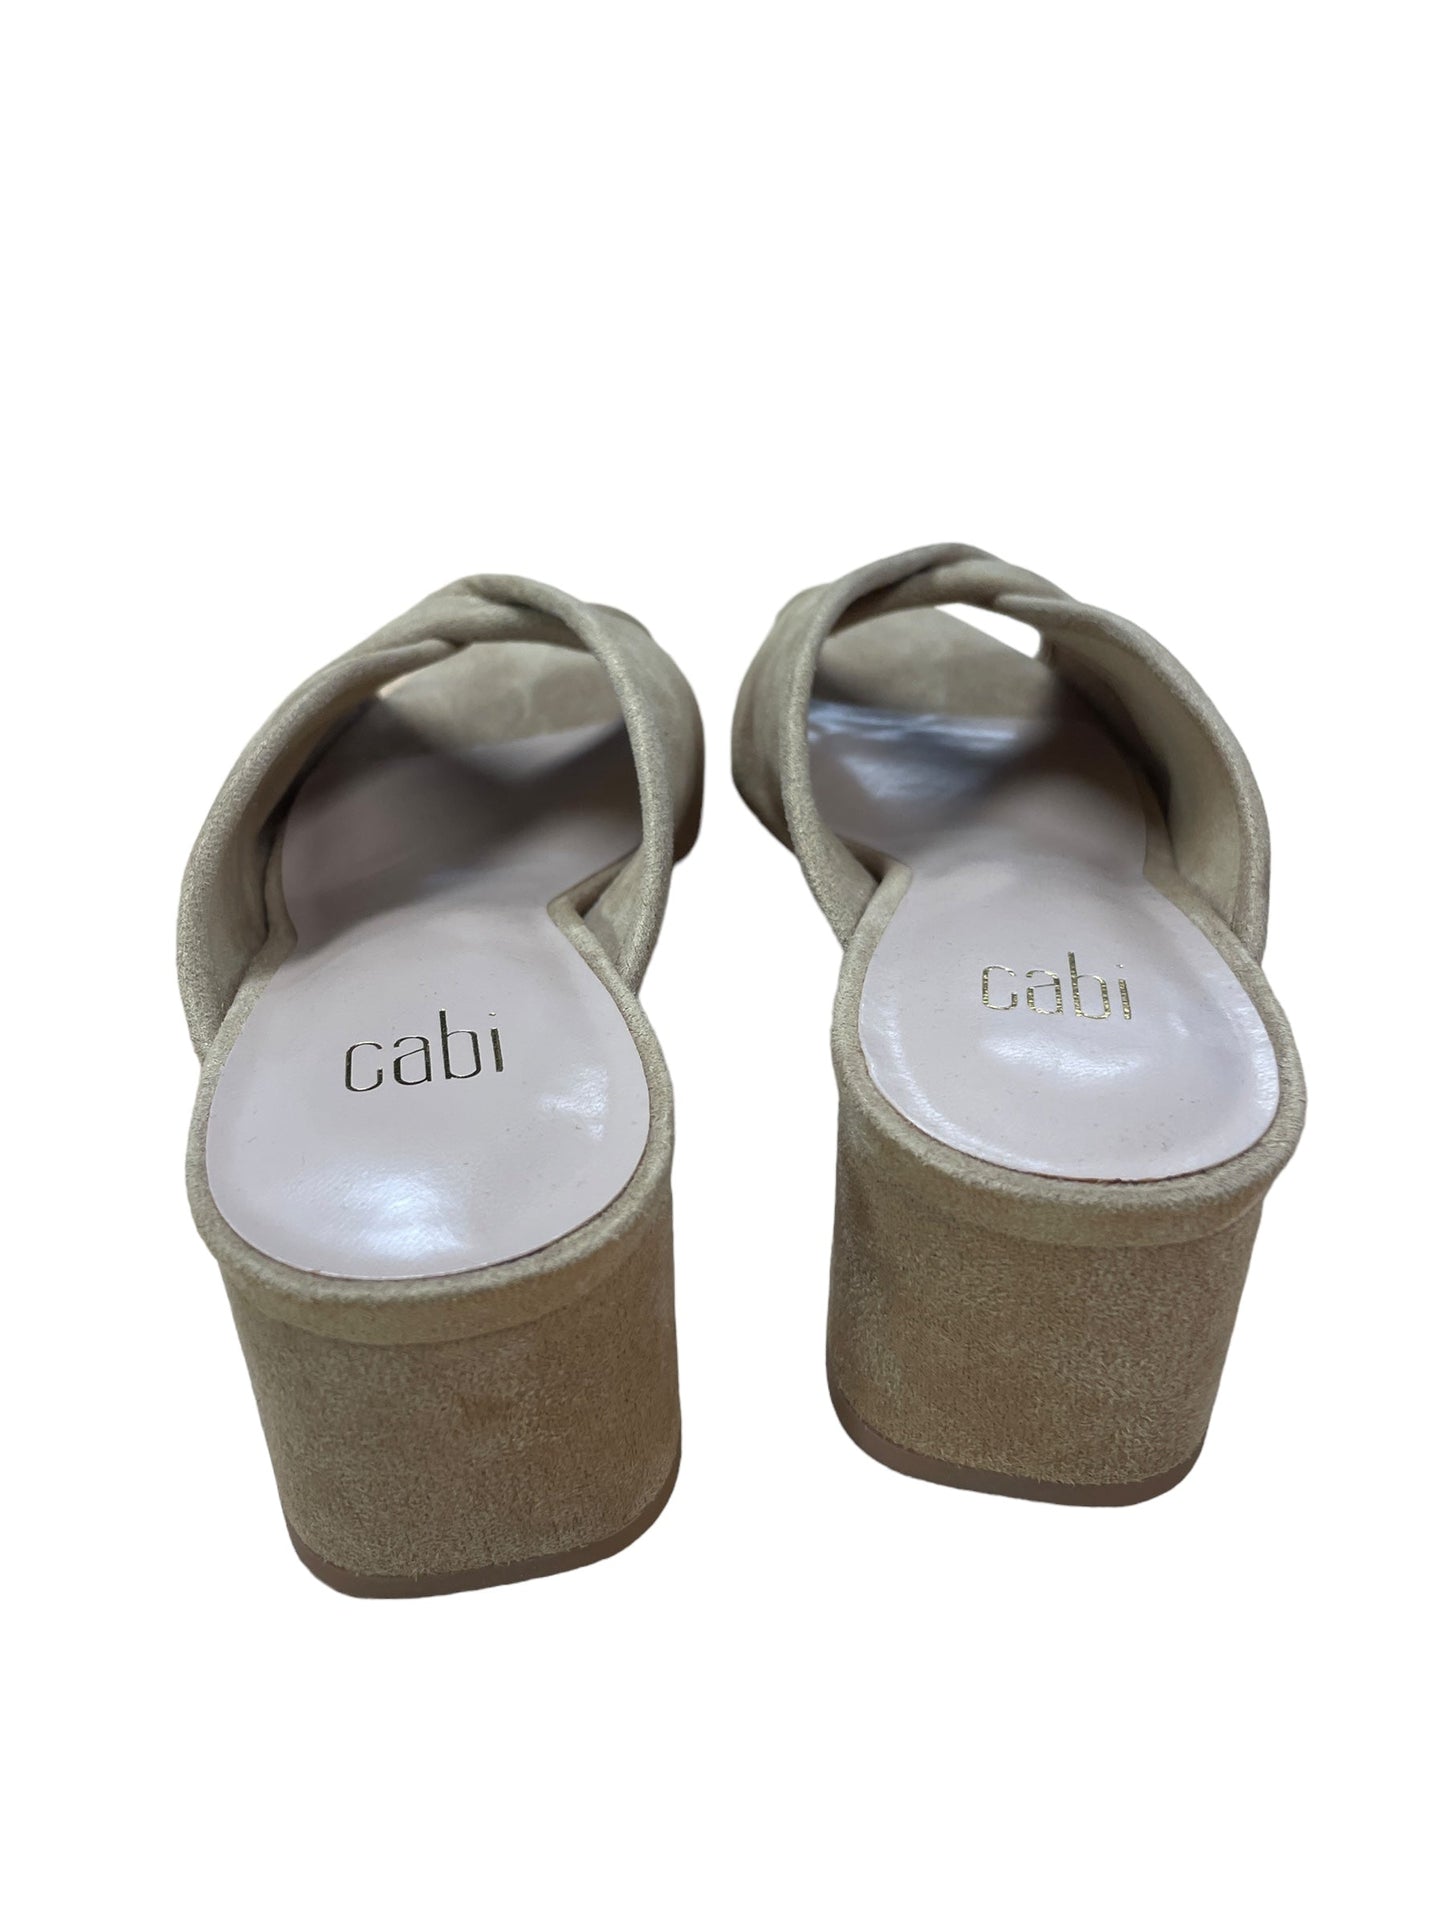 Shoes Heels Block By Cabi  Size: 7